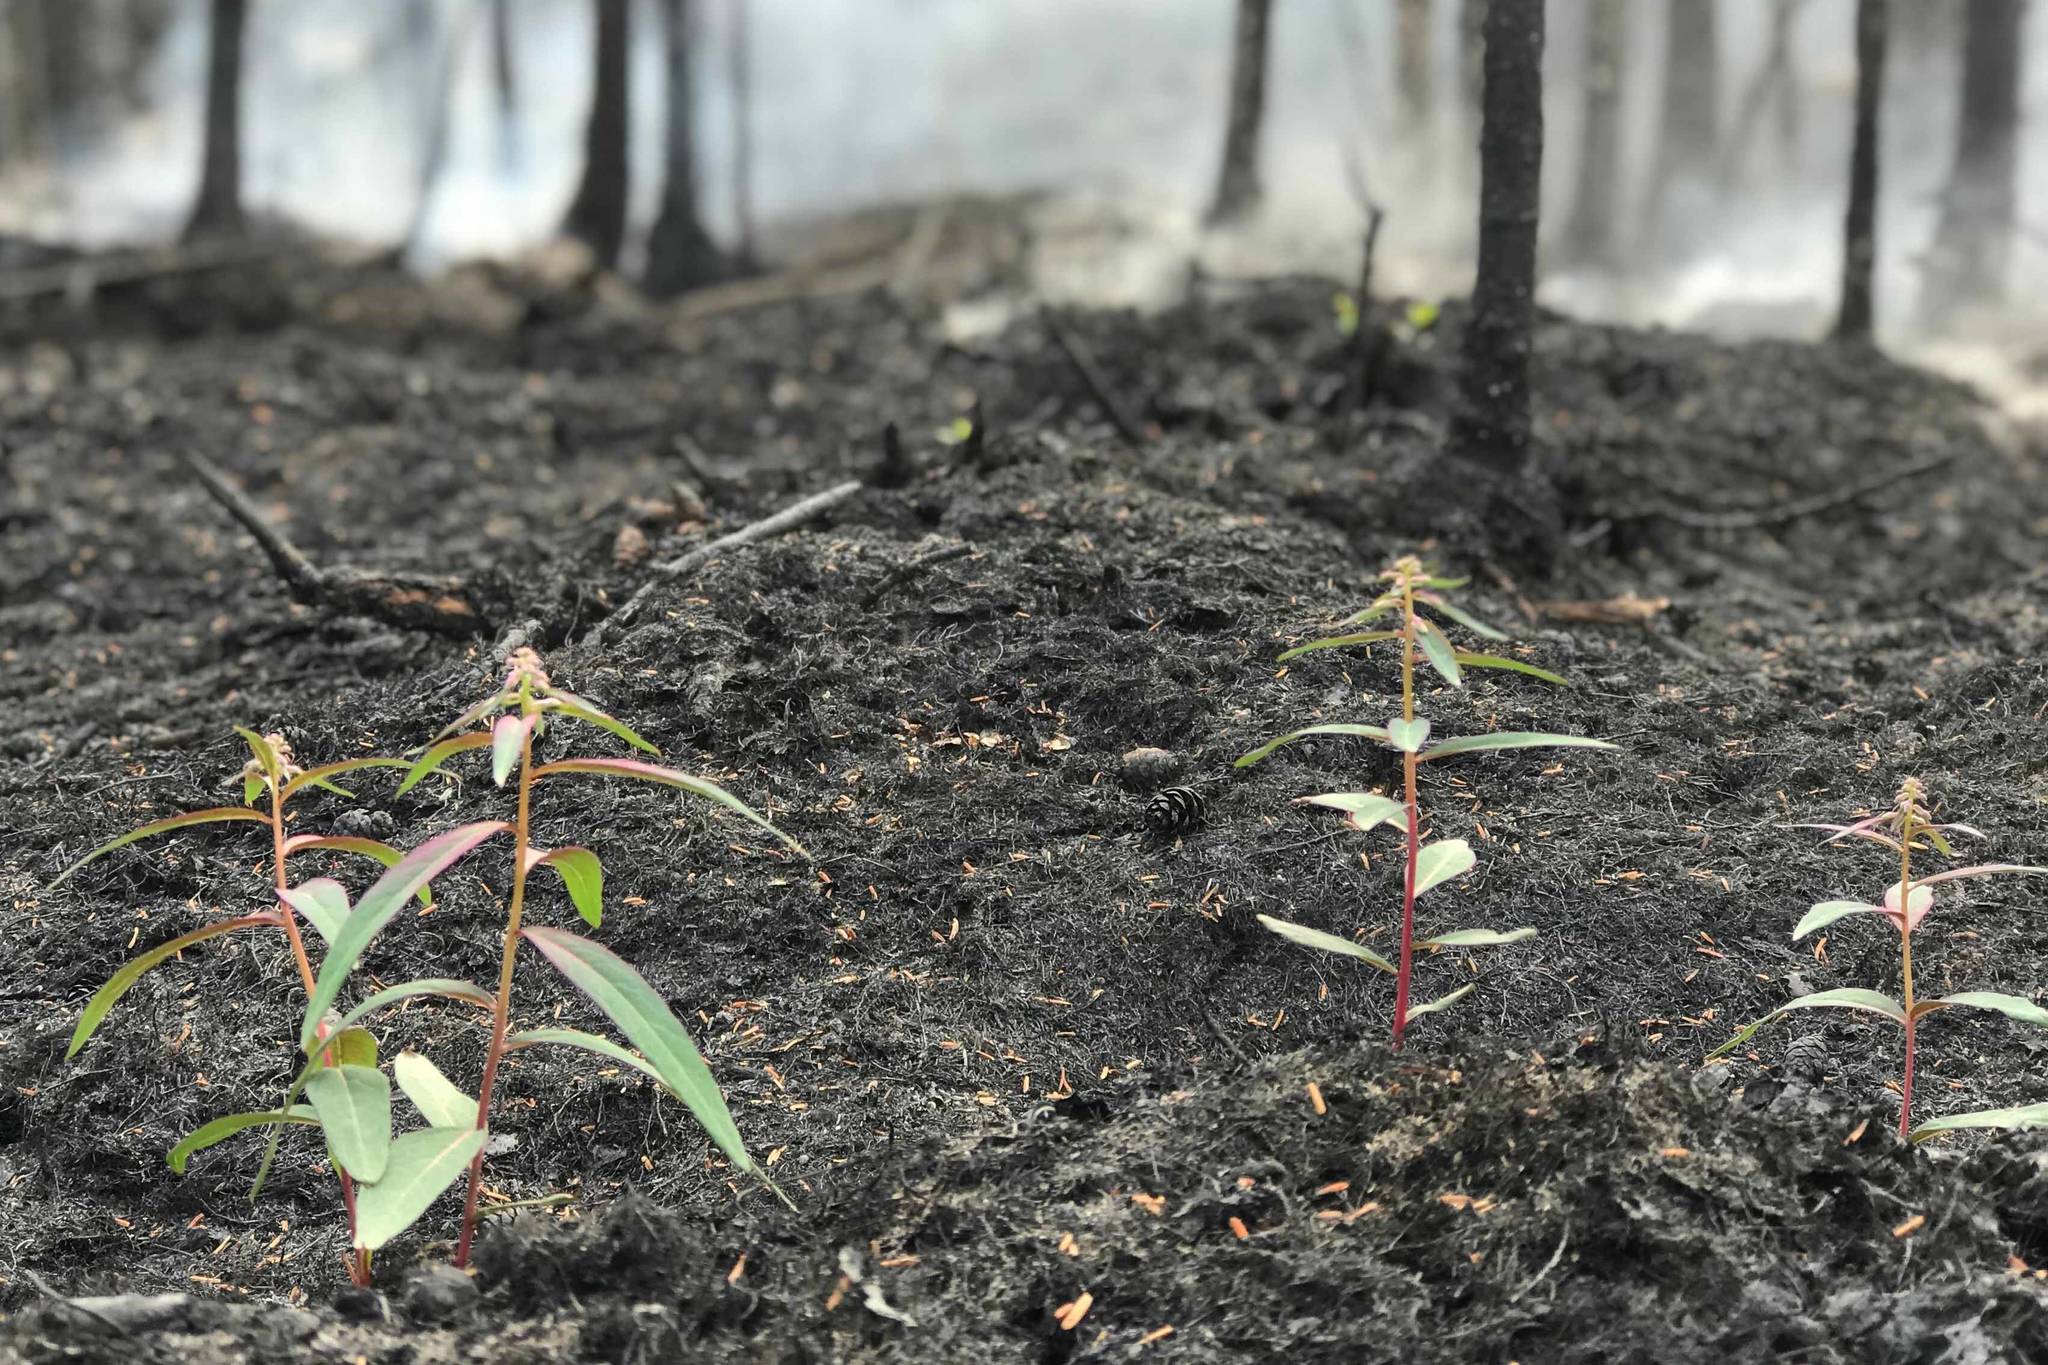 As portions of the Swan Lake Fire continue to smolder in the Kenai National Wildlife Refuge, new forest growth has already started sprouting near Watson Lake as seen here on July 24, 2019. (Courtesy Eastern Area Incident Management Team)